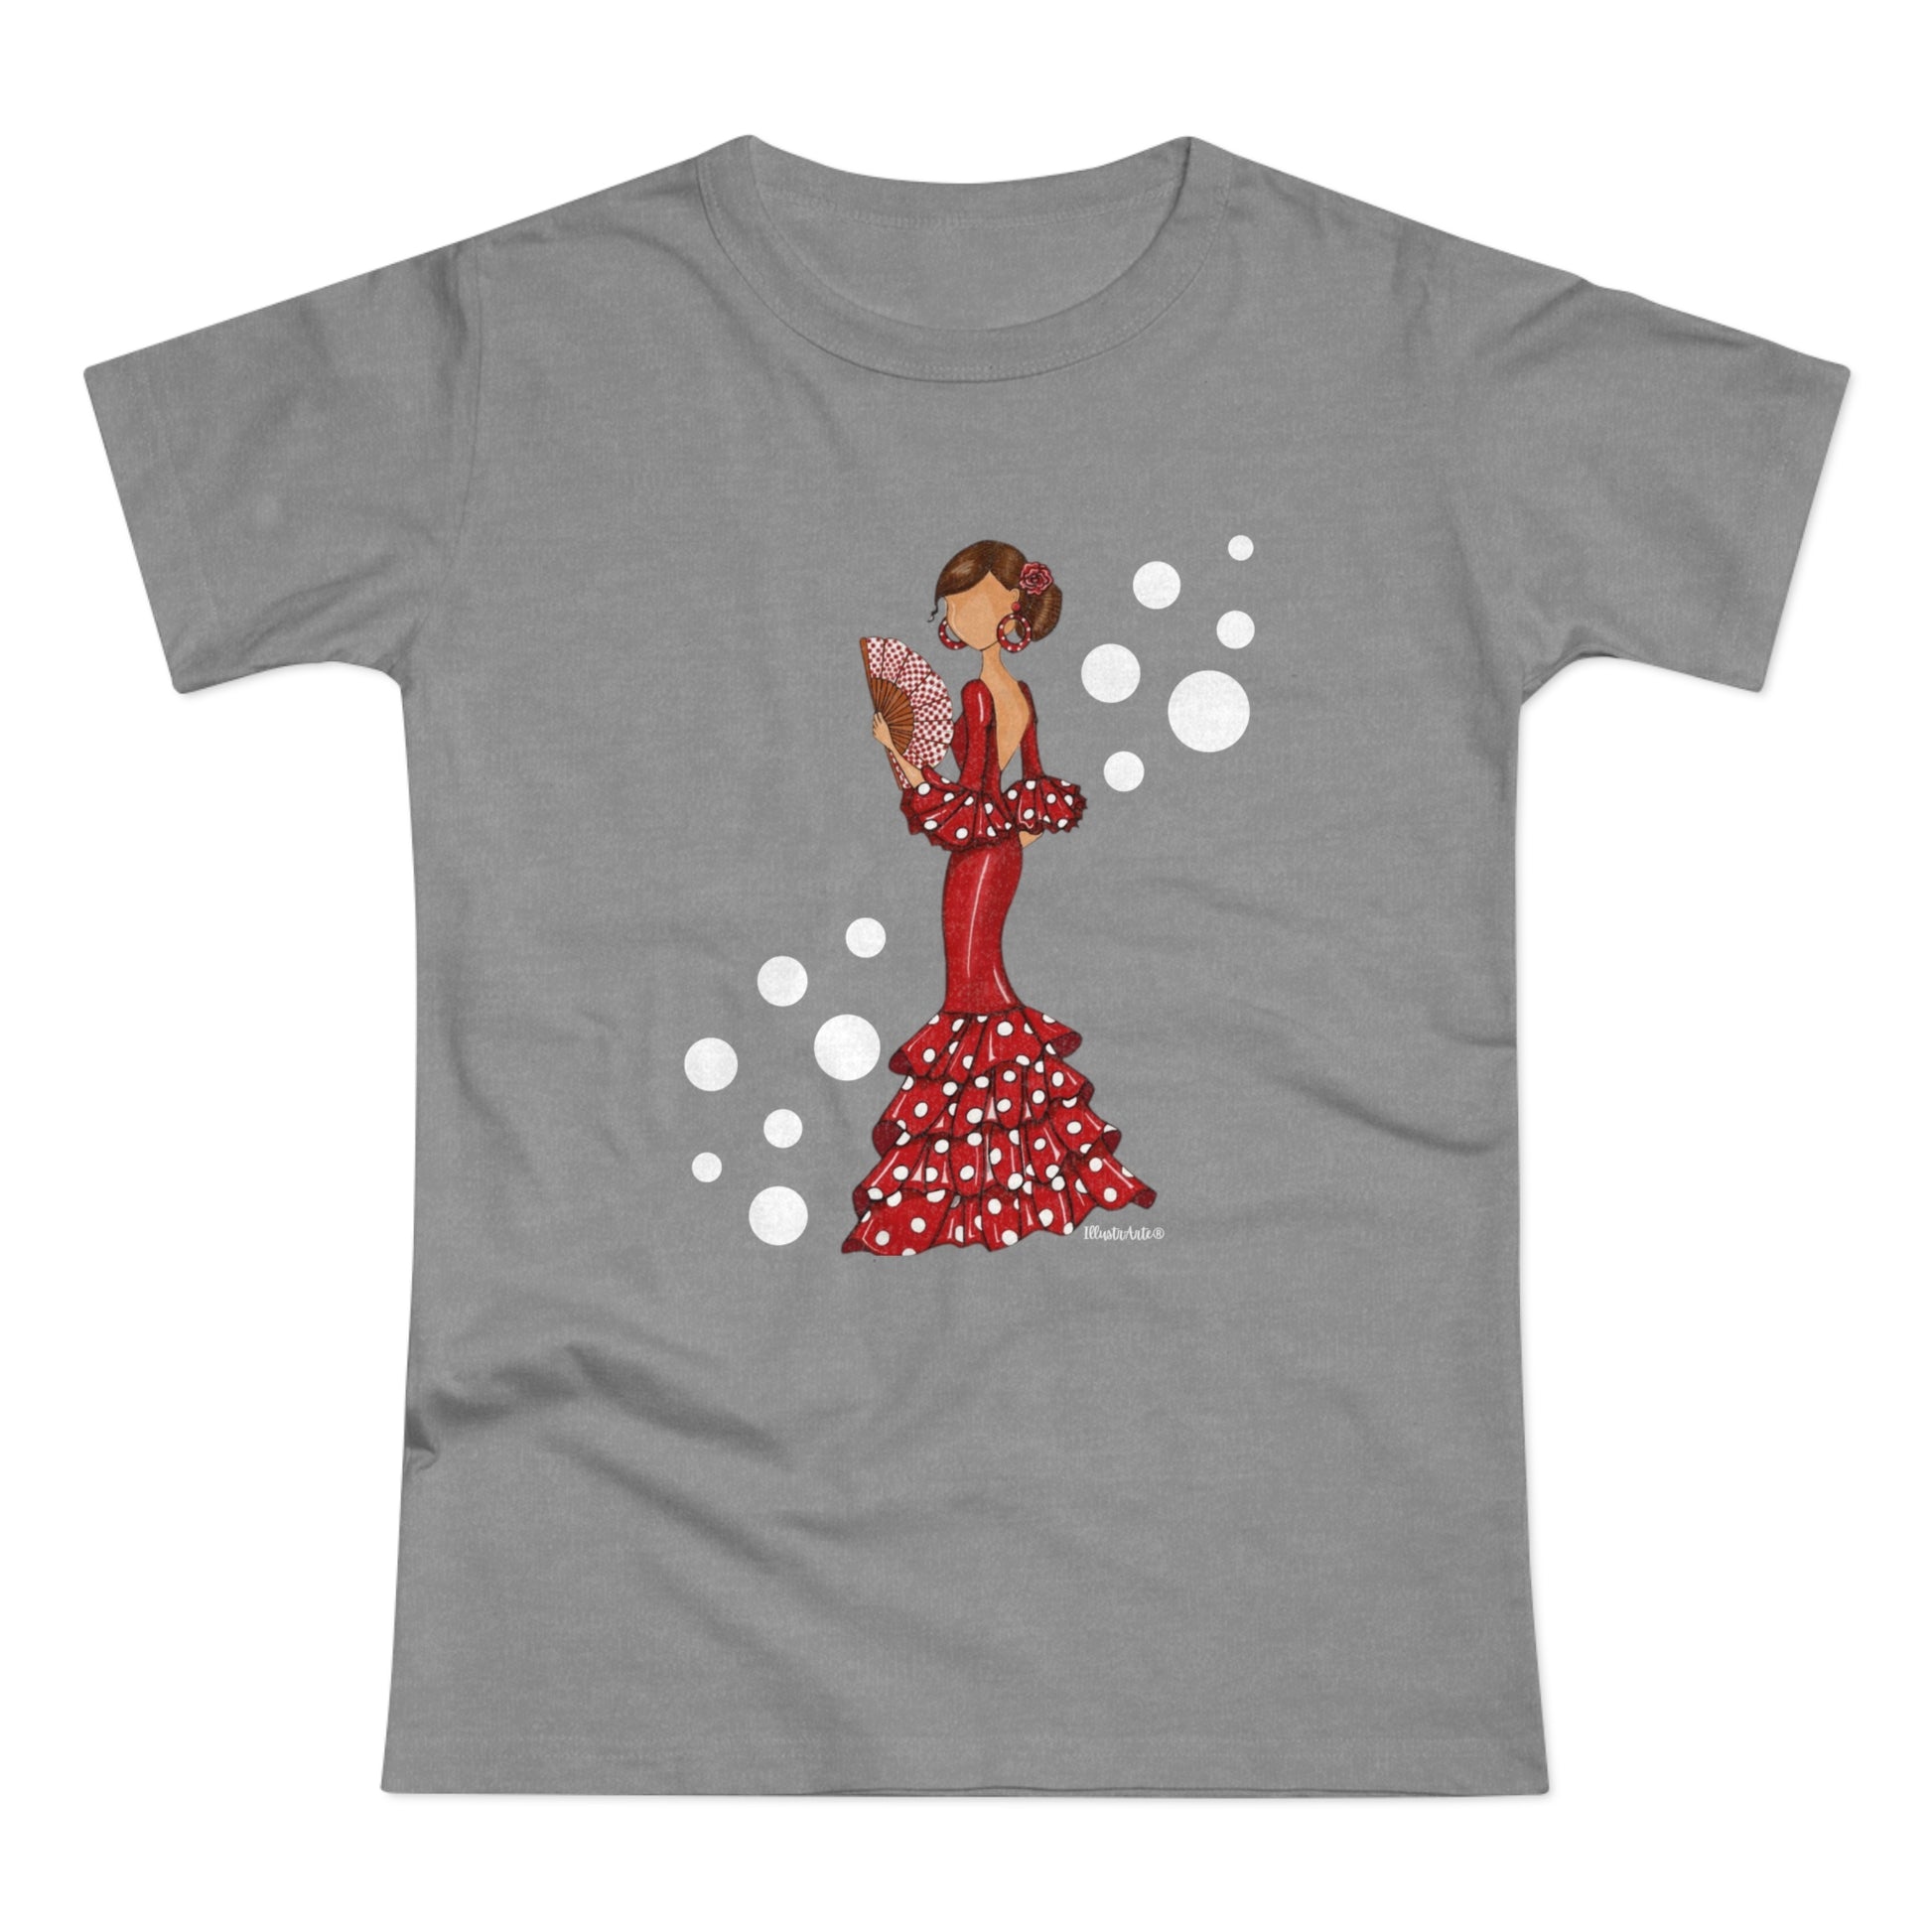 a women's t - shirt with a woman in a red dress holding a